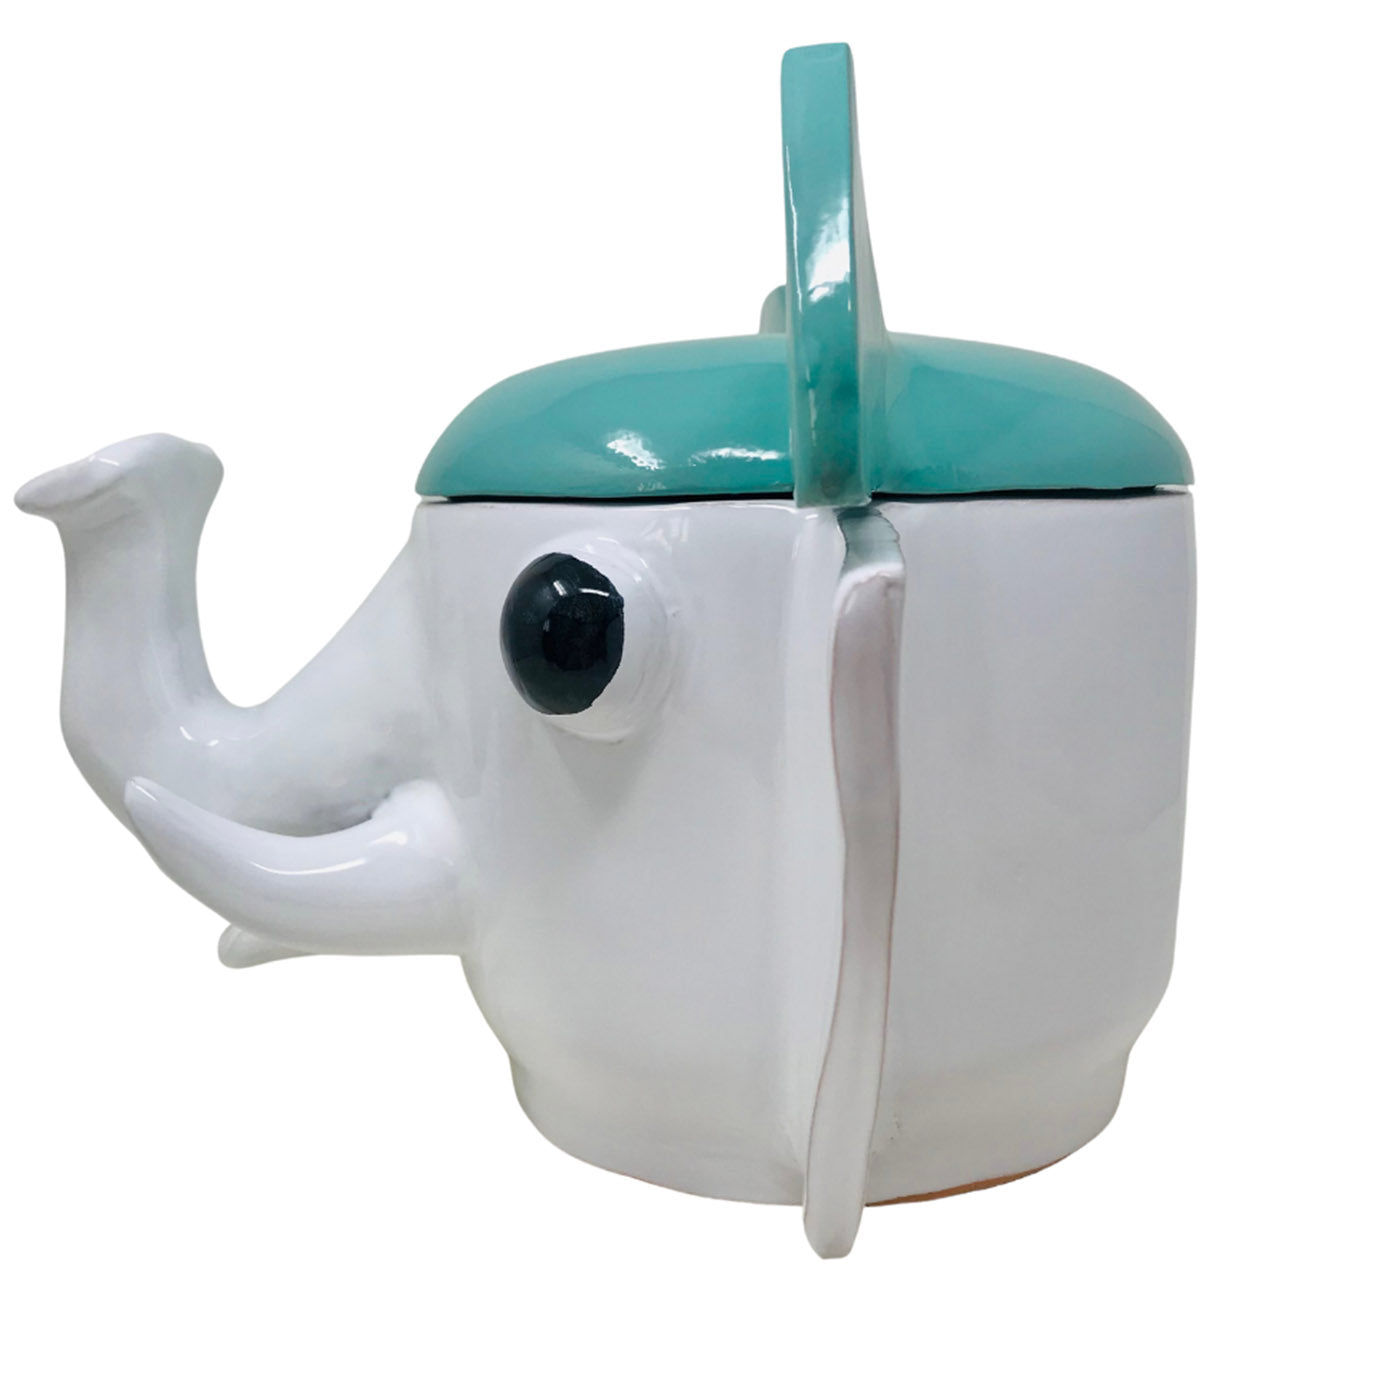 Large Water Green and White Elephant Container with Lid - Alternative view 2